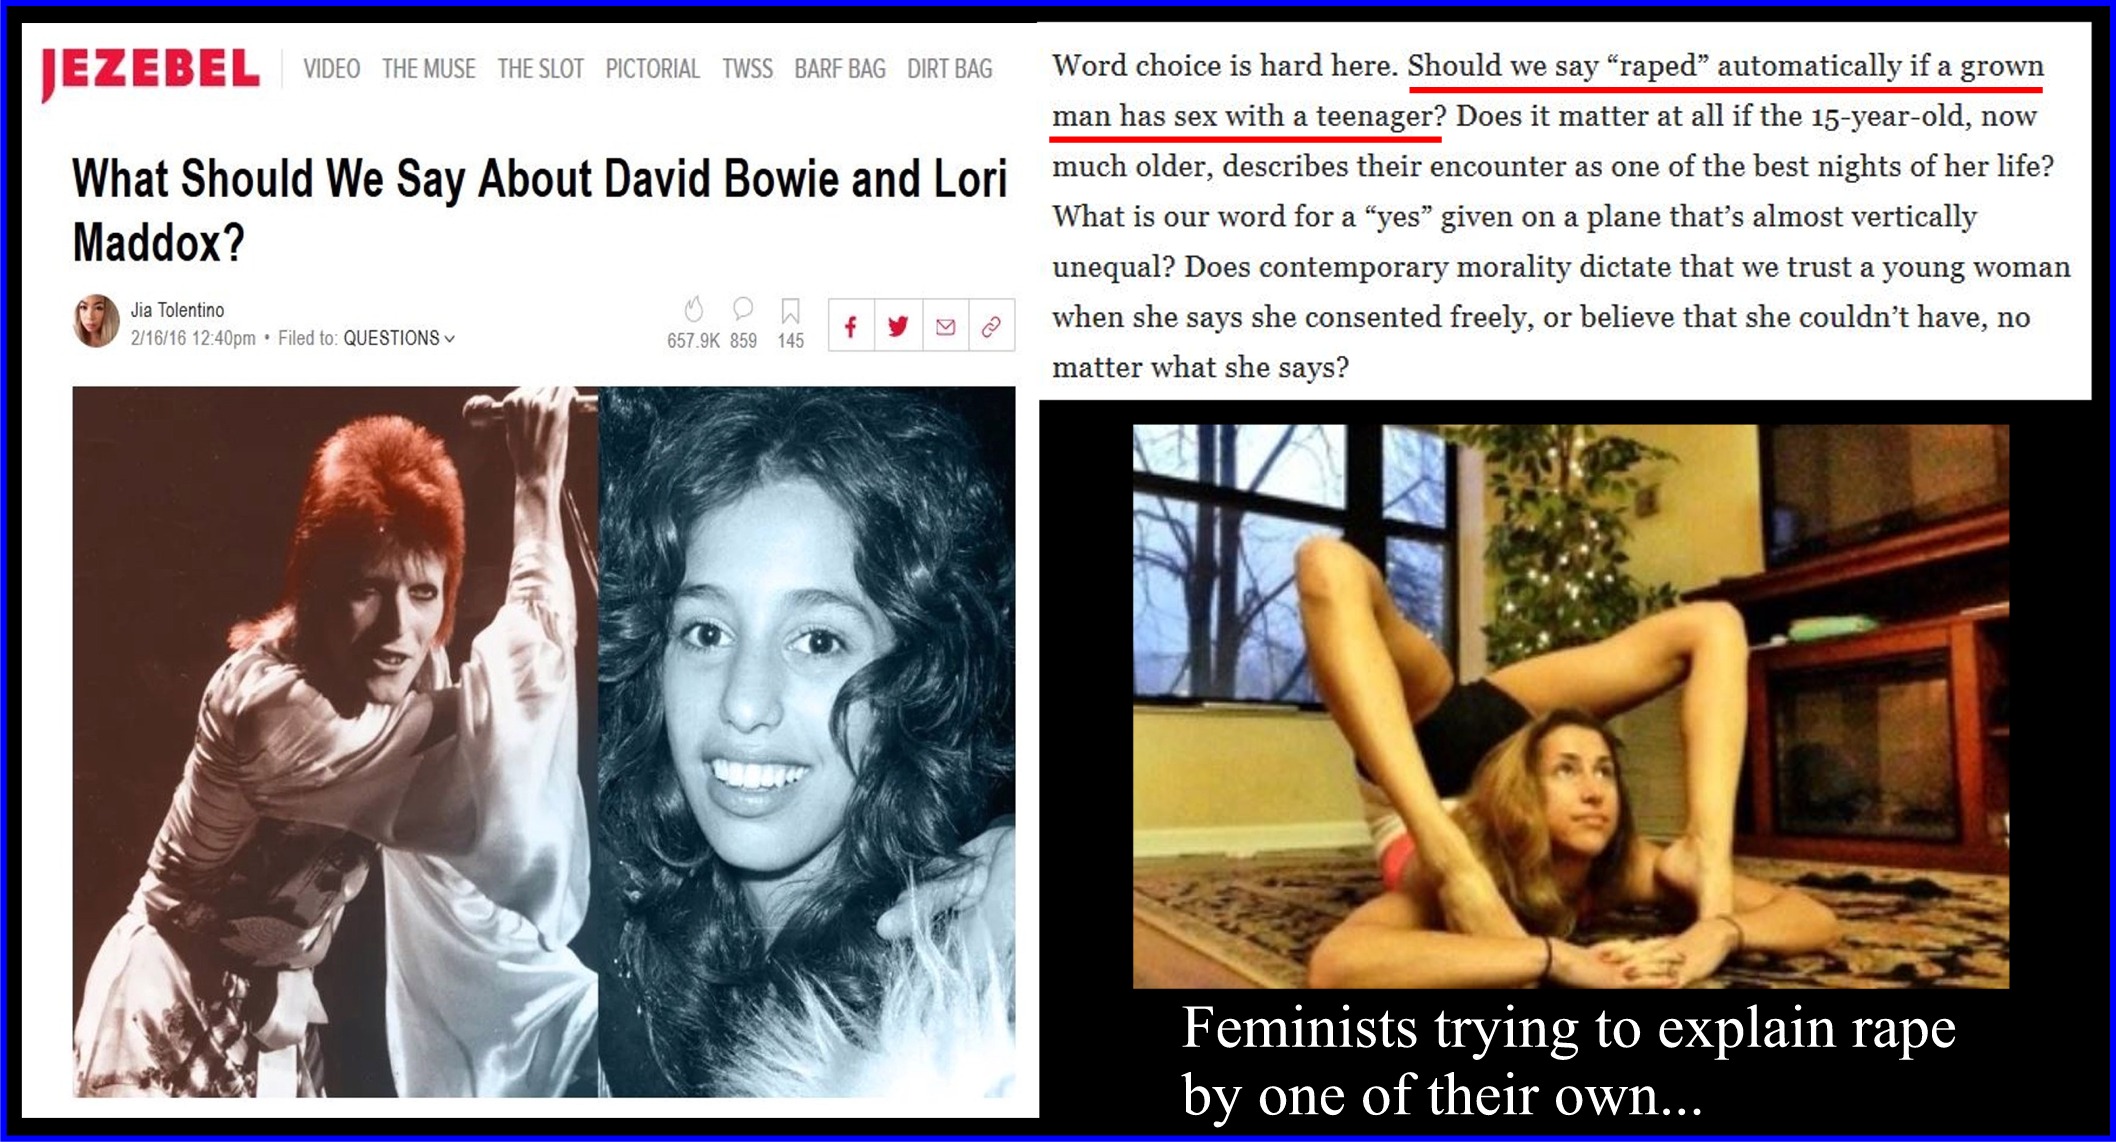 Conservative memes - lori maddox - Iezebel Video The Muse The Slot Pcvo Twss Buifbng Dirbag What Should We Say About David Bowie and Lori Maddox? Word choice is hard here. Should we say raped automatically if a grown man has sex with a teenager? Does it m